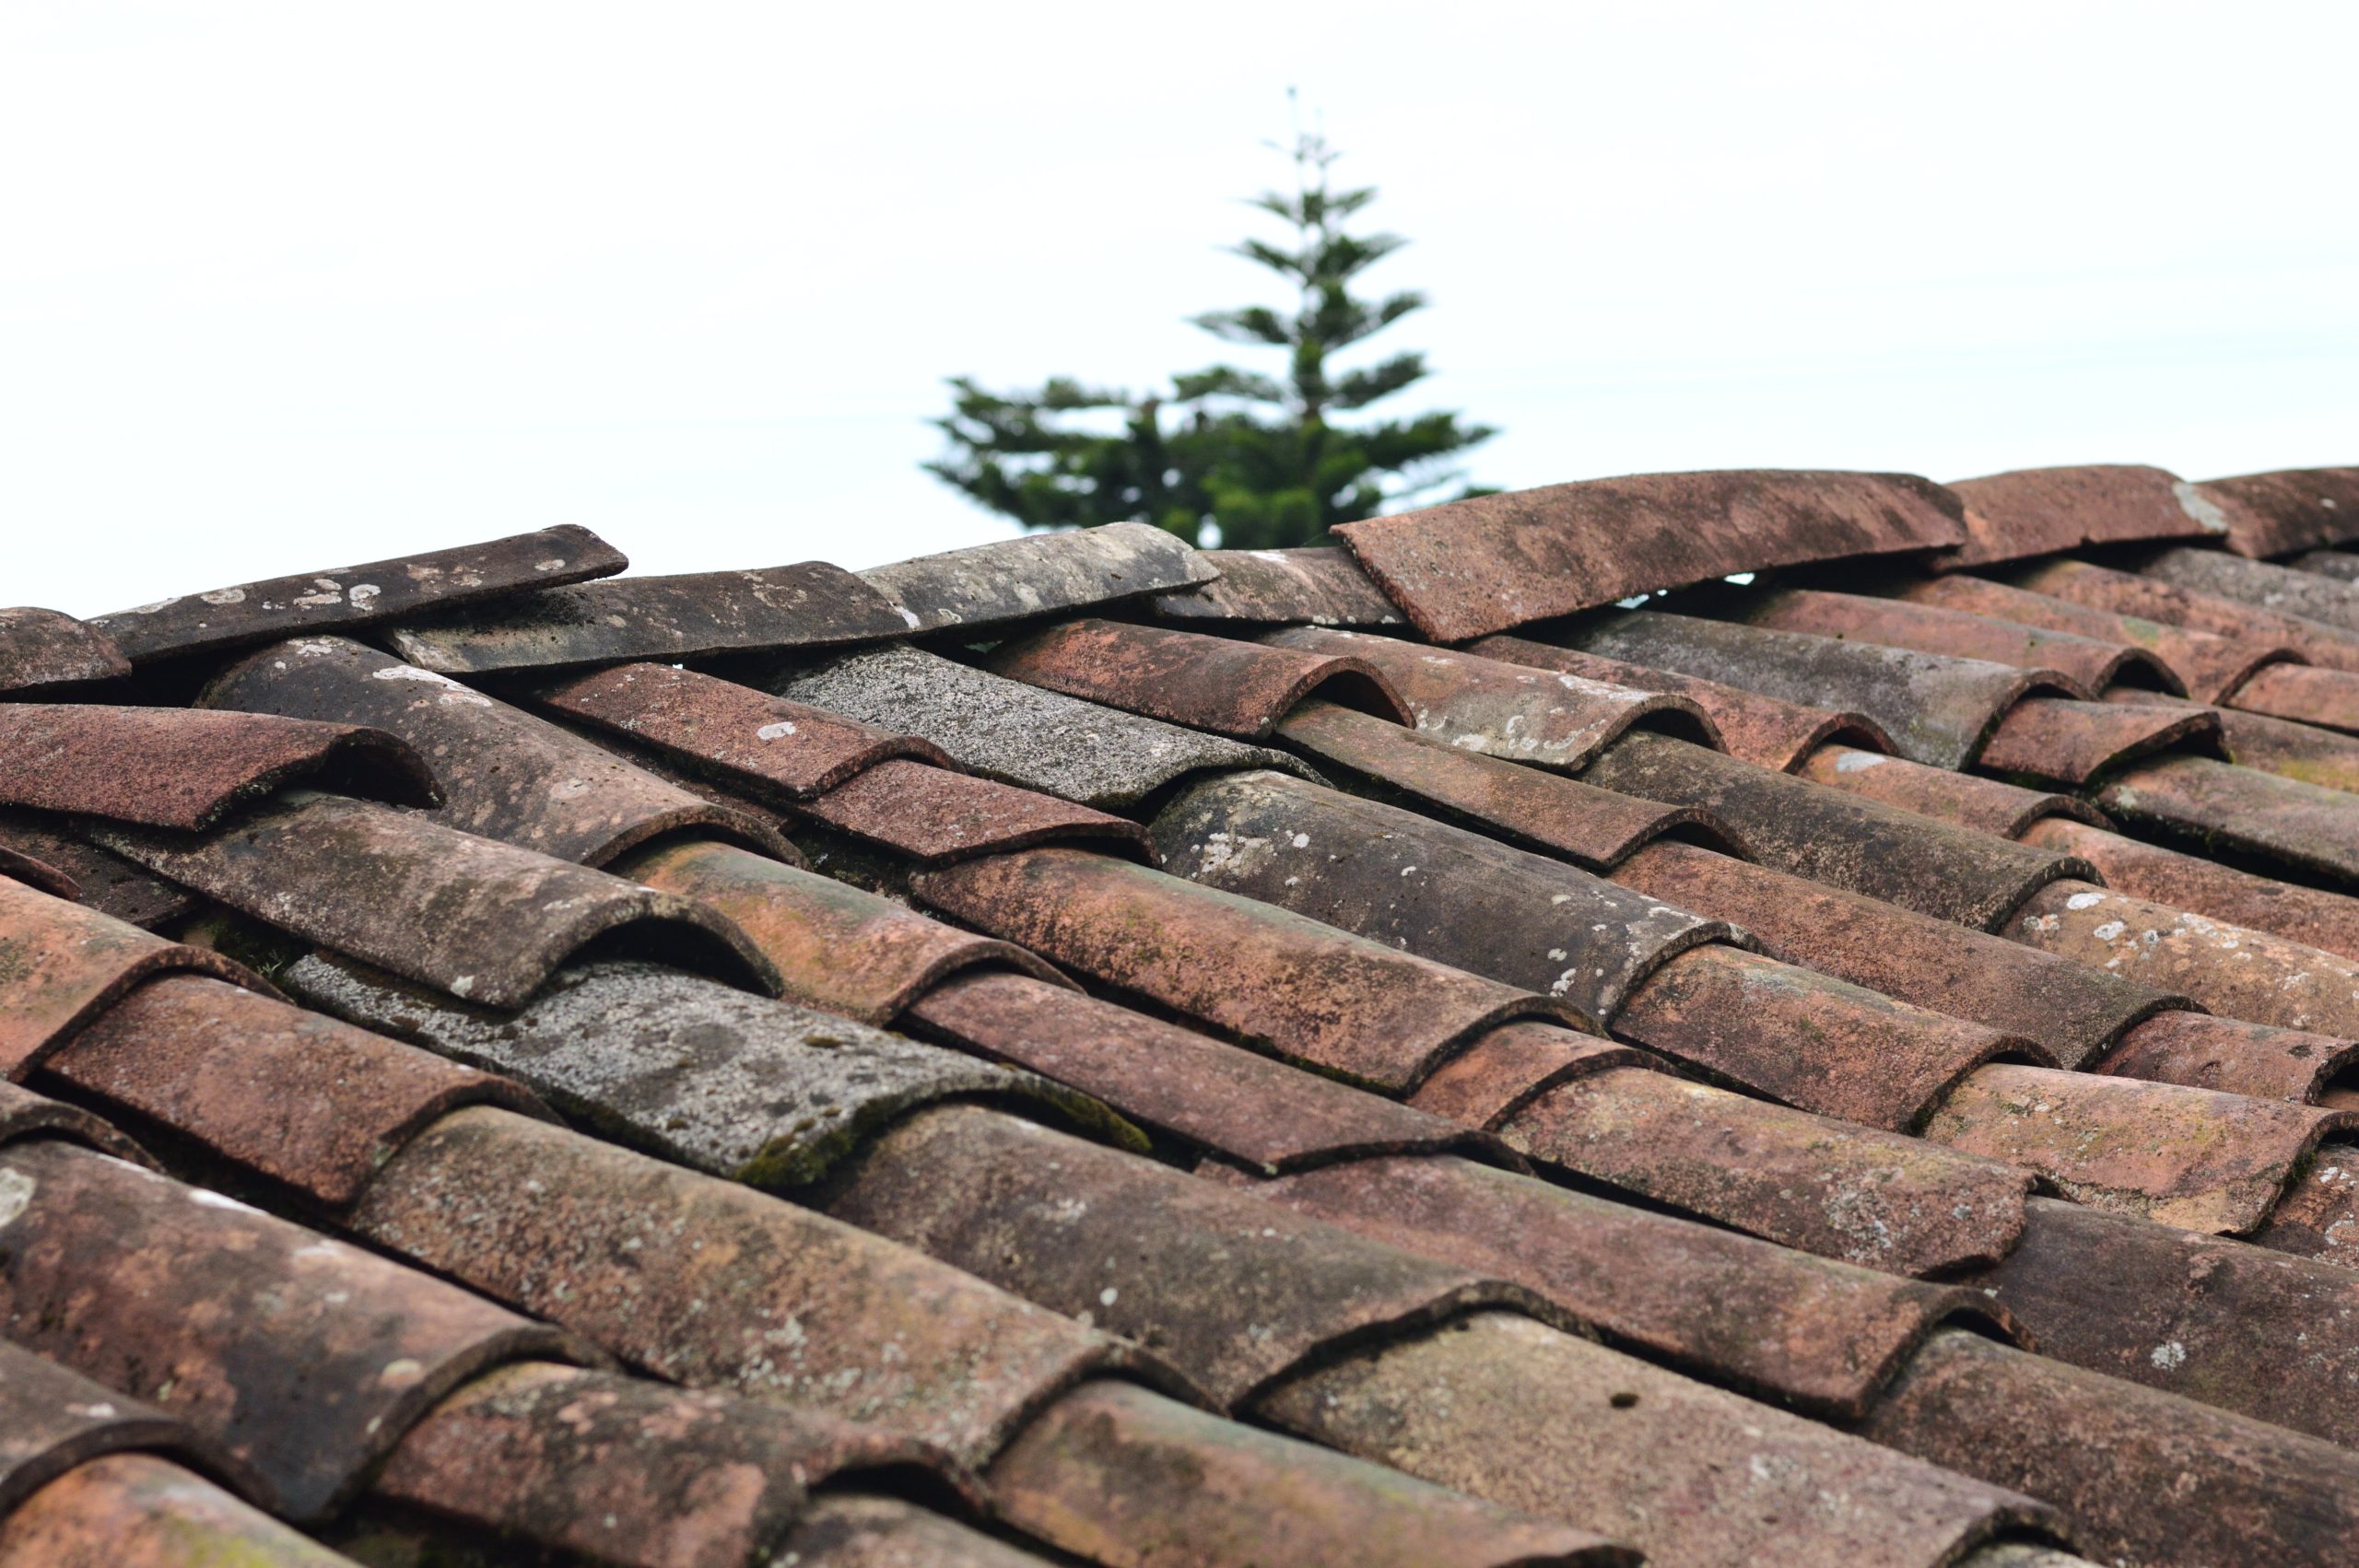 A roof covered in old and damaged shingles can be one of the early signs you have a roof leak coming.